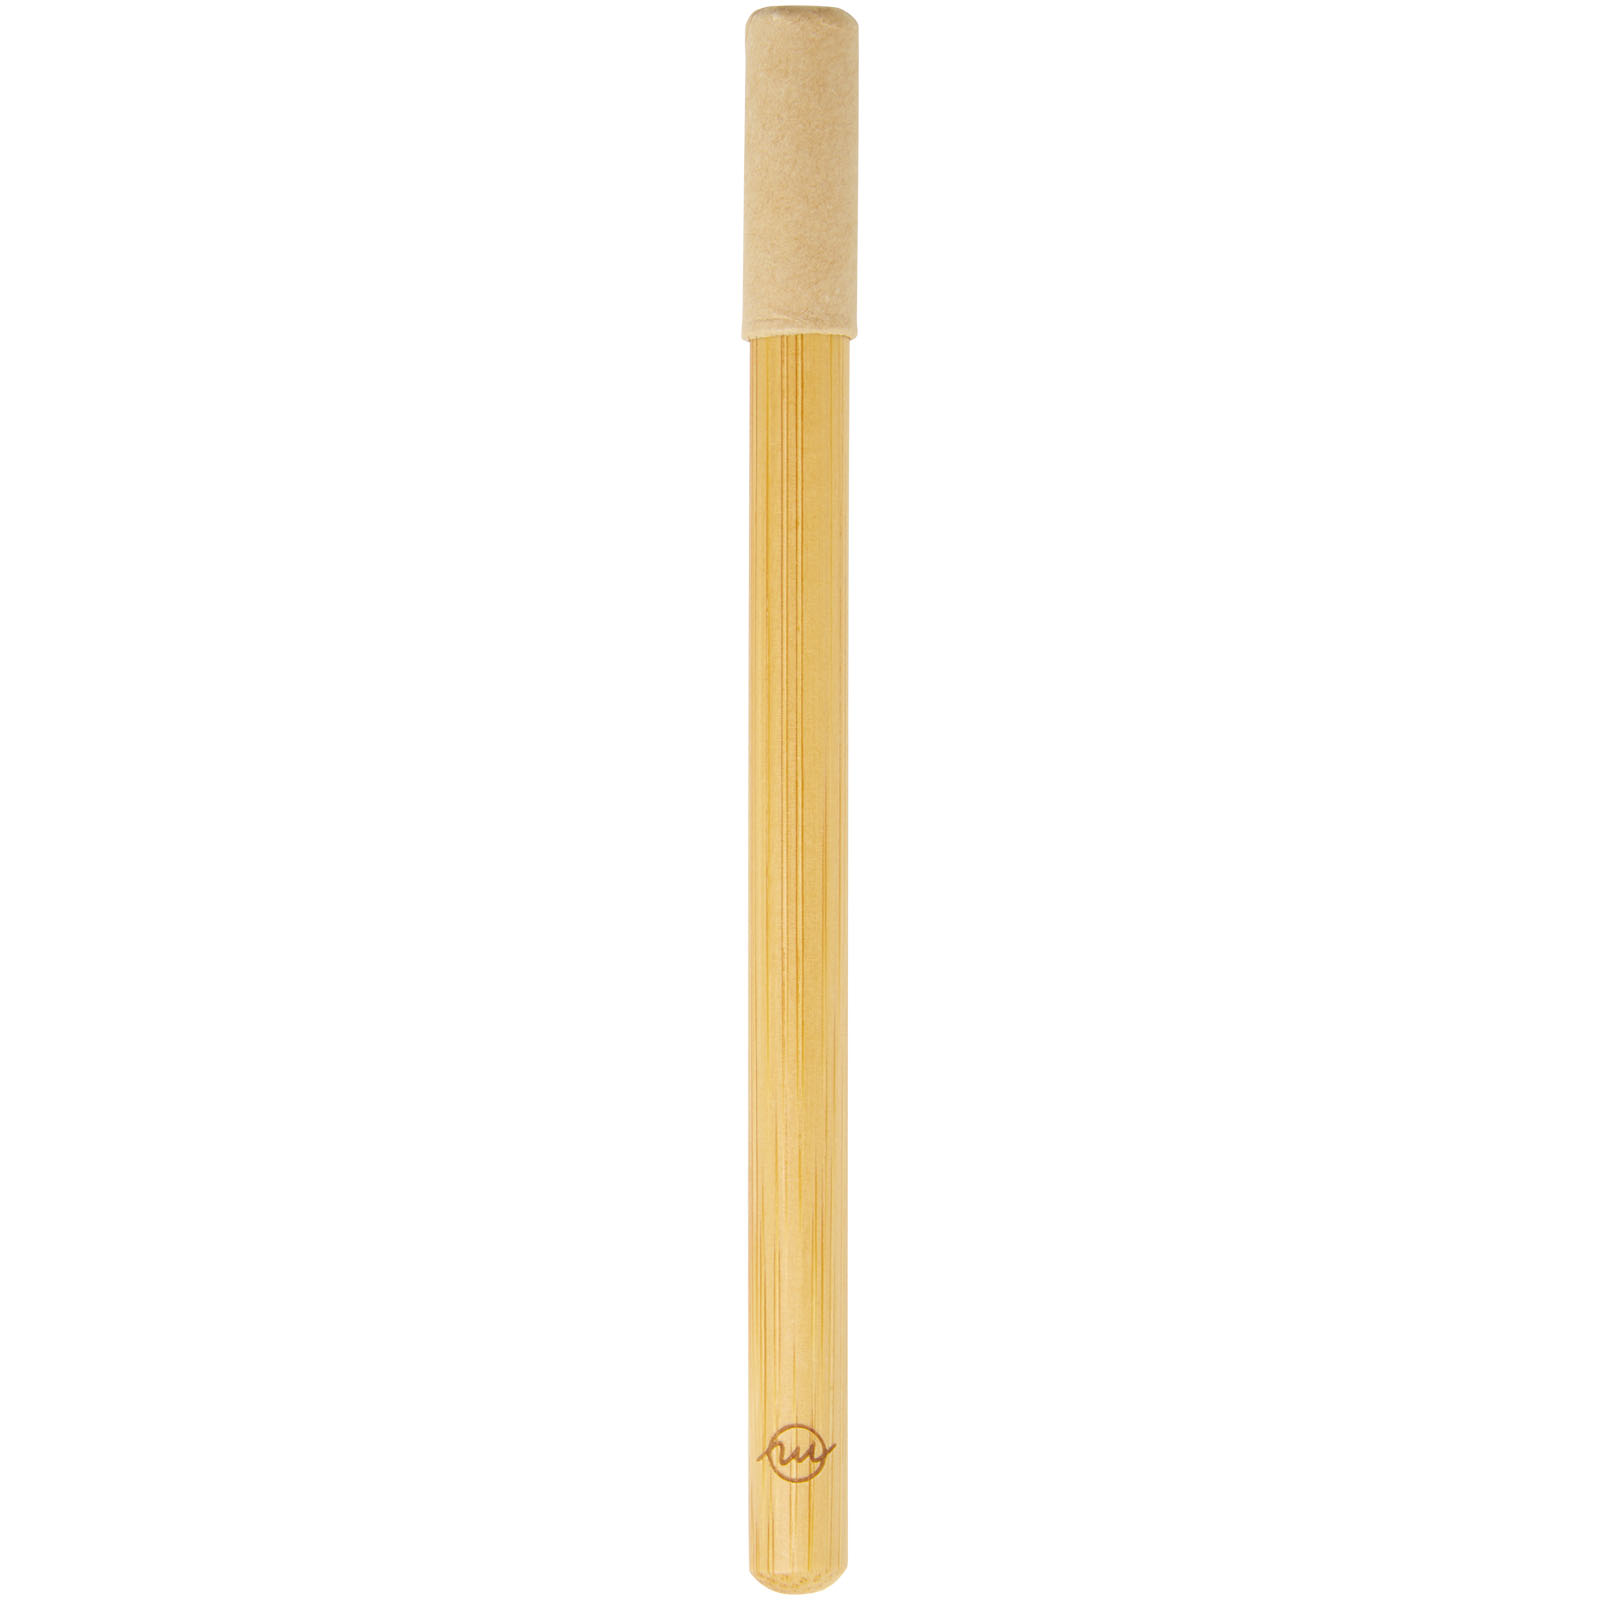 Other Pens & Writing Accessories - Perie bamboo inkless pen